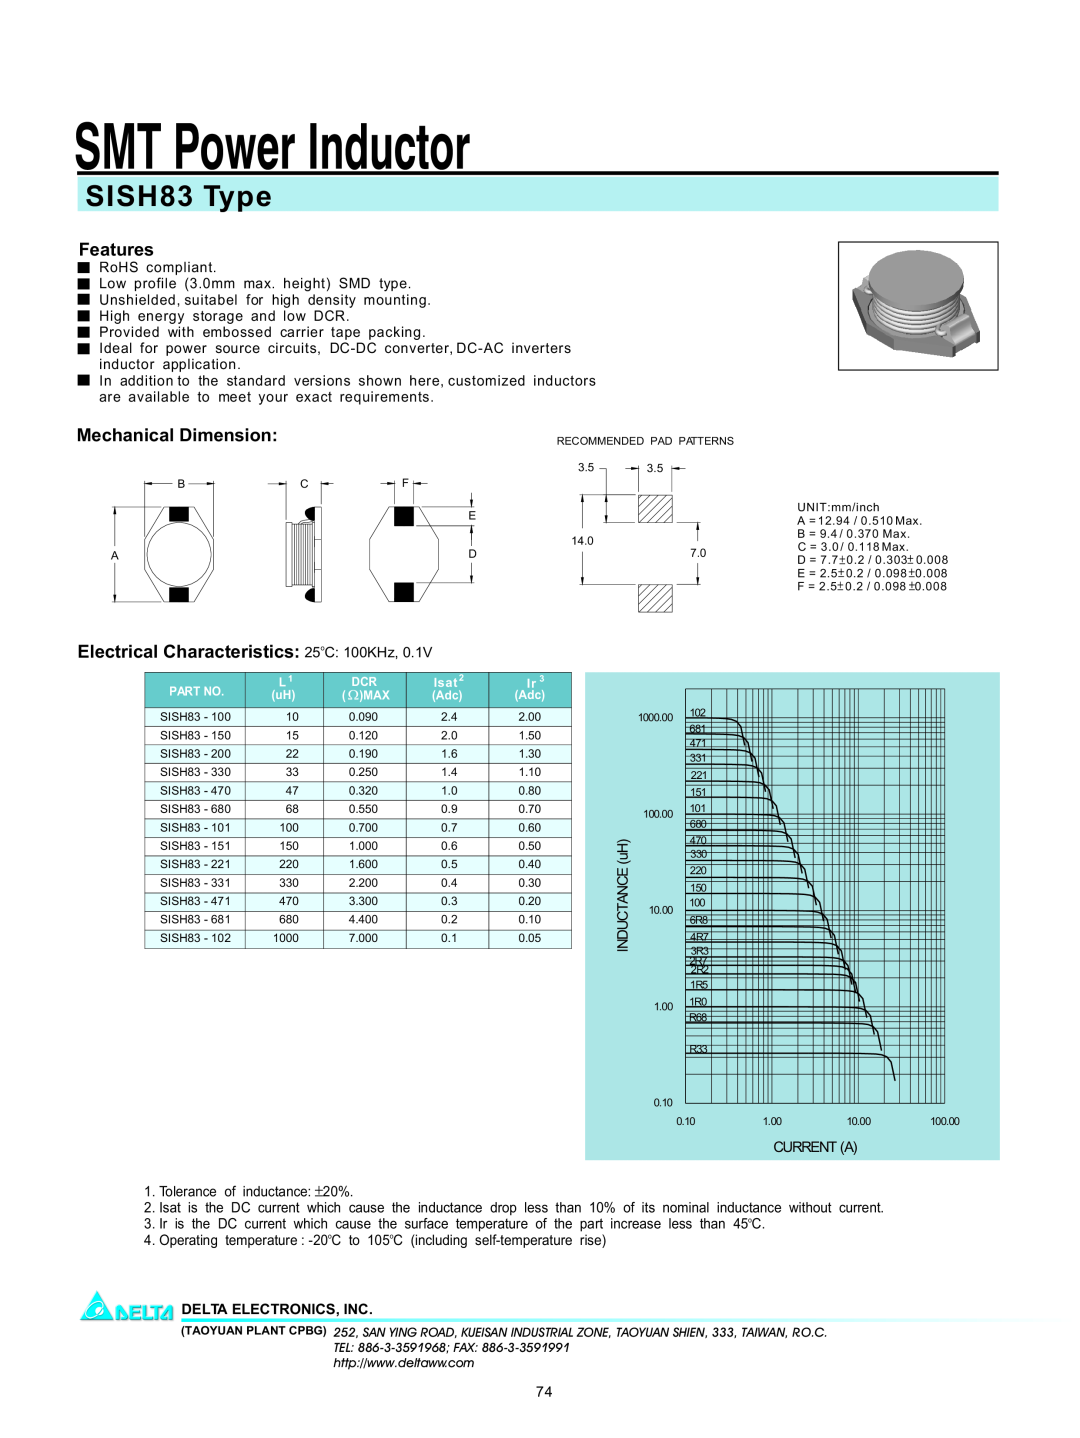 Delta Electronics manual SMT Power Inductor, SISH83 Type, Features, Mechanical Dimension, Delta Electronics, Inc 